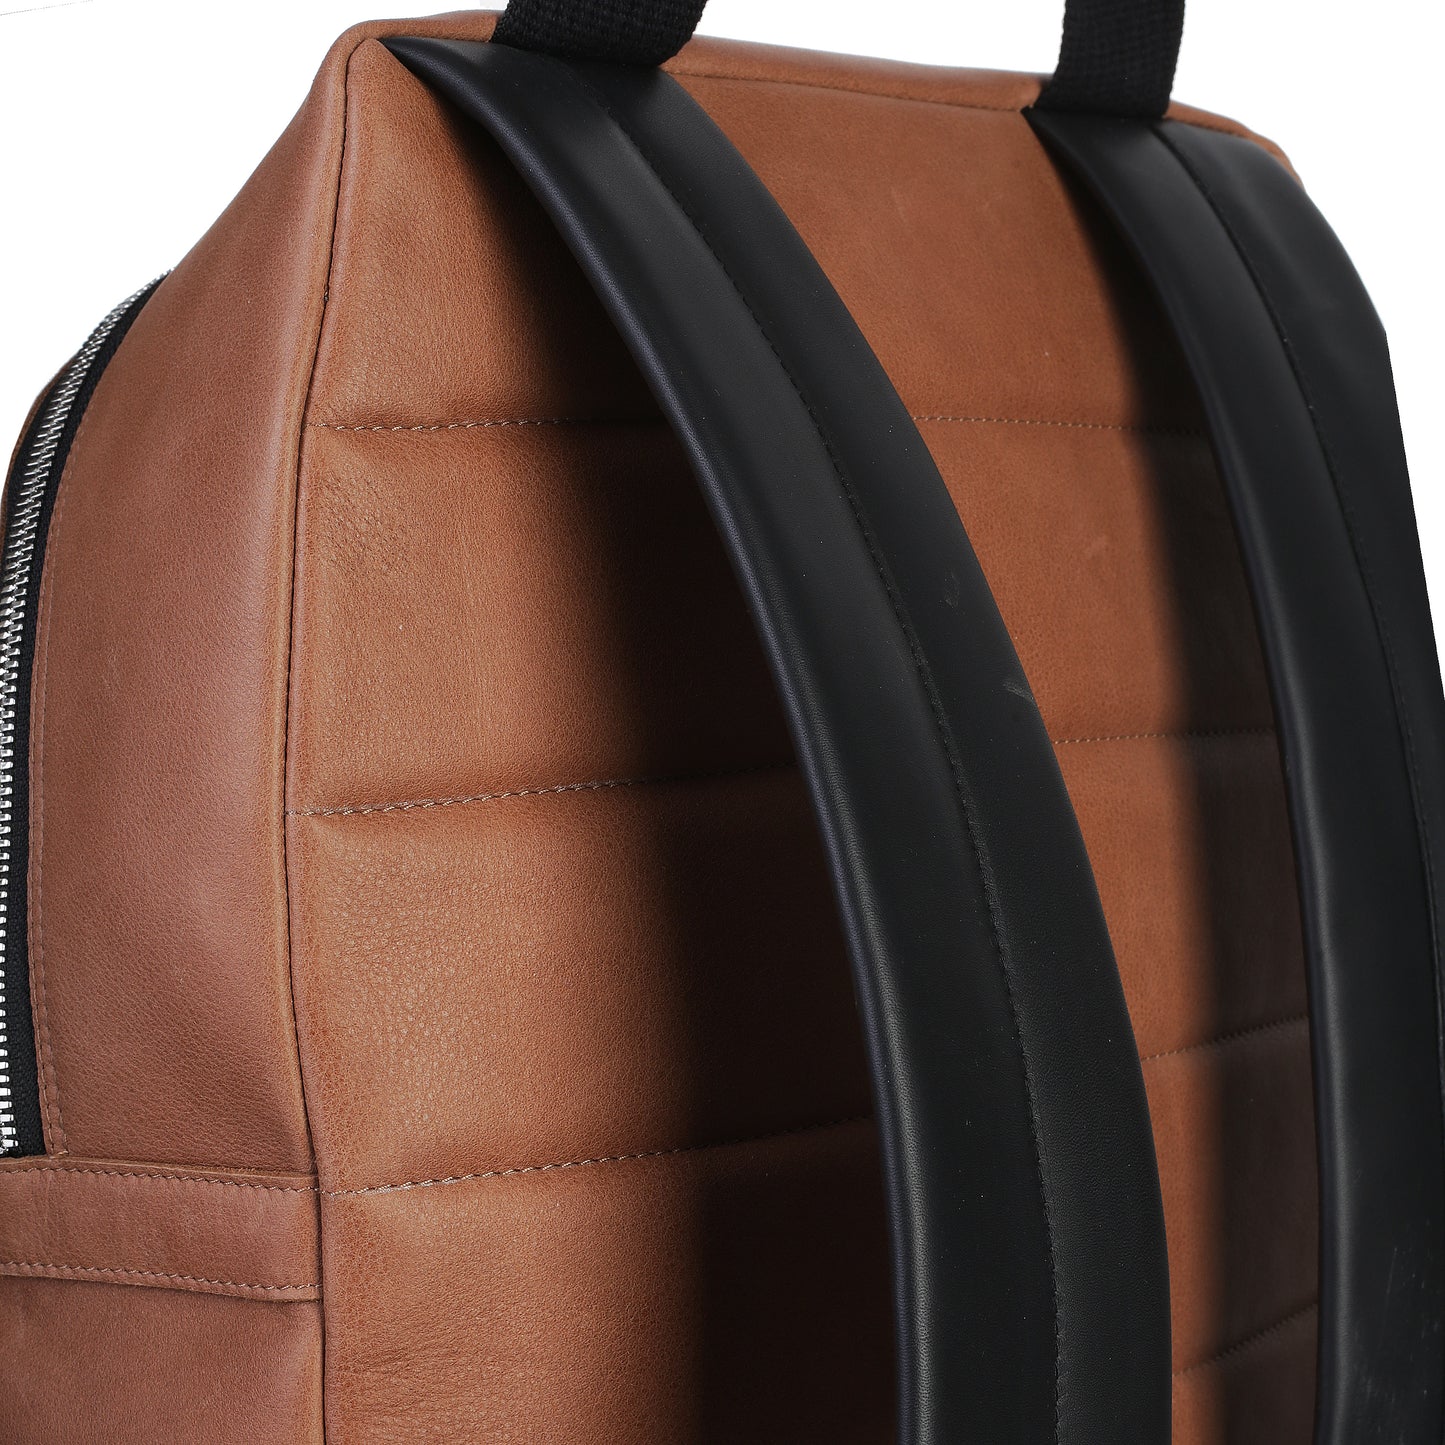 Men's napa brown leather backpack